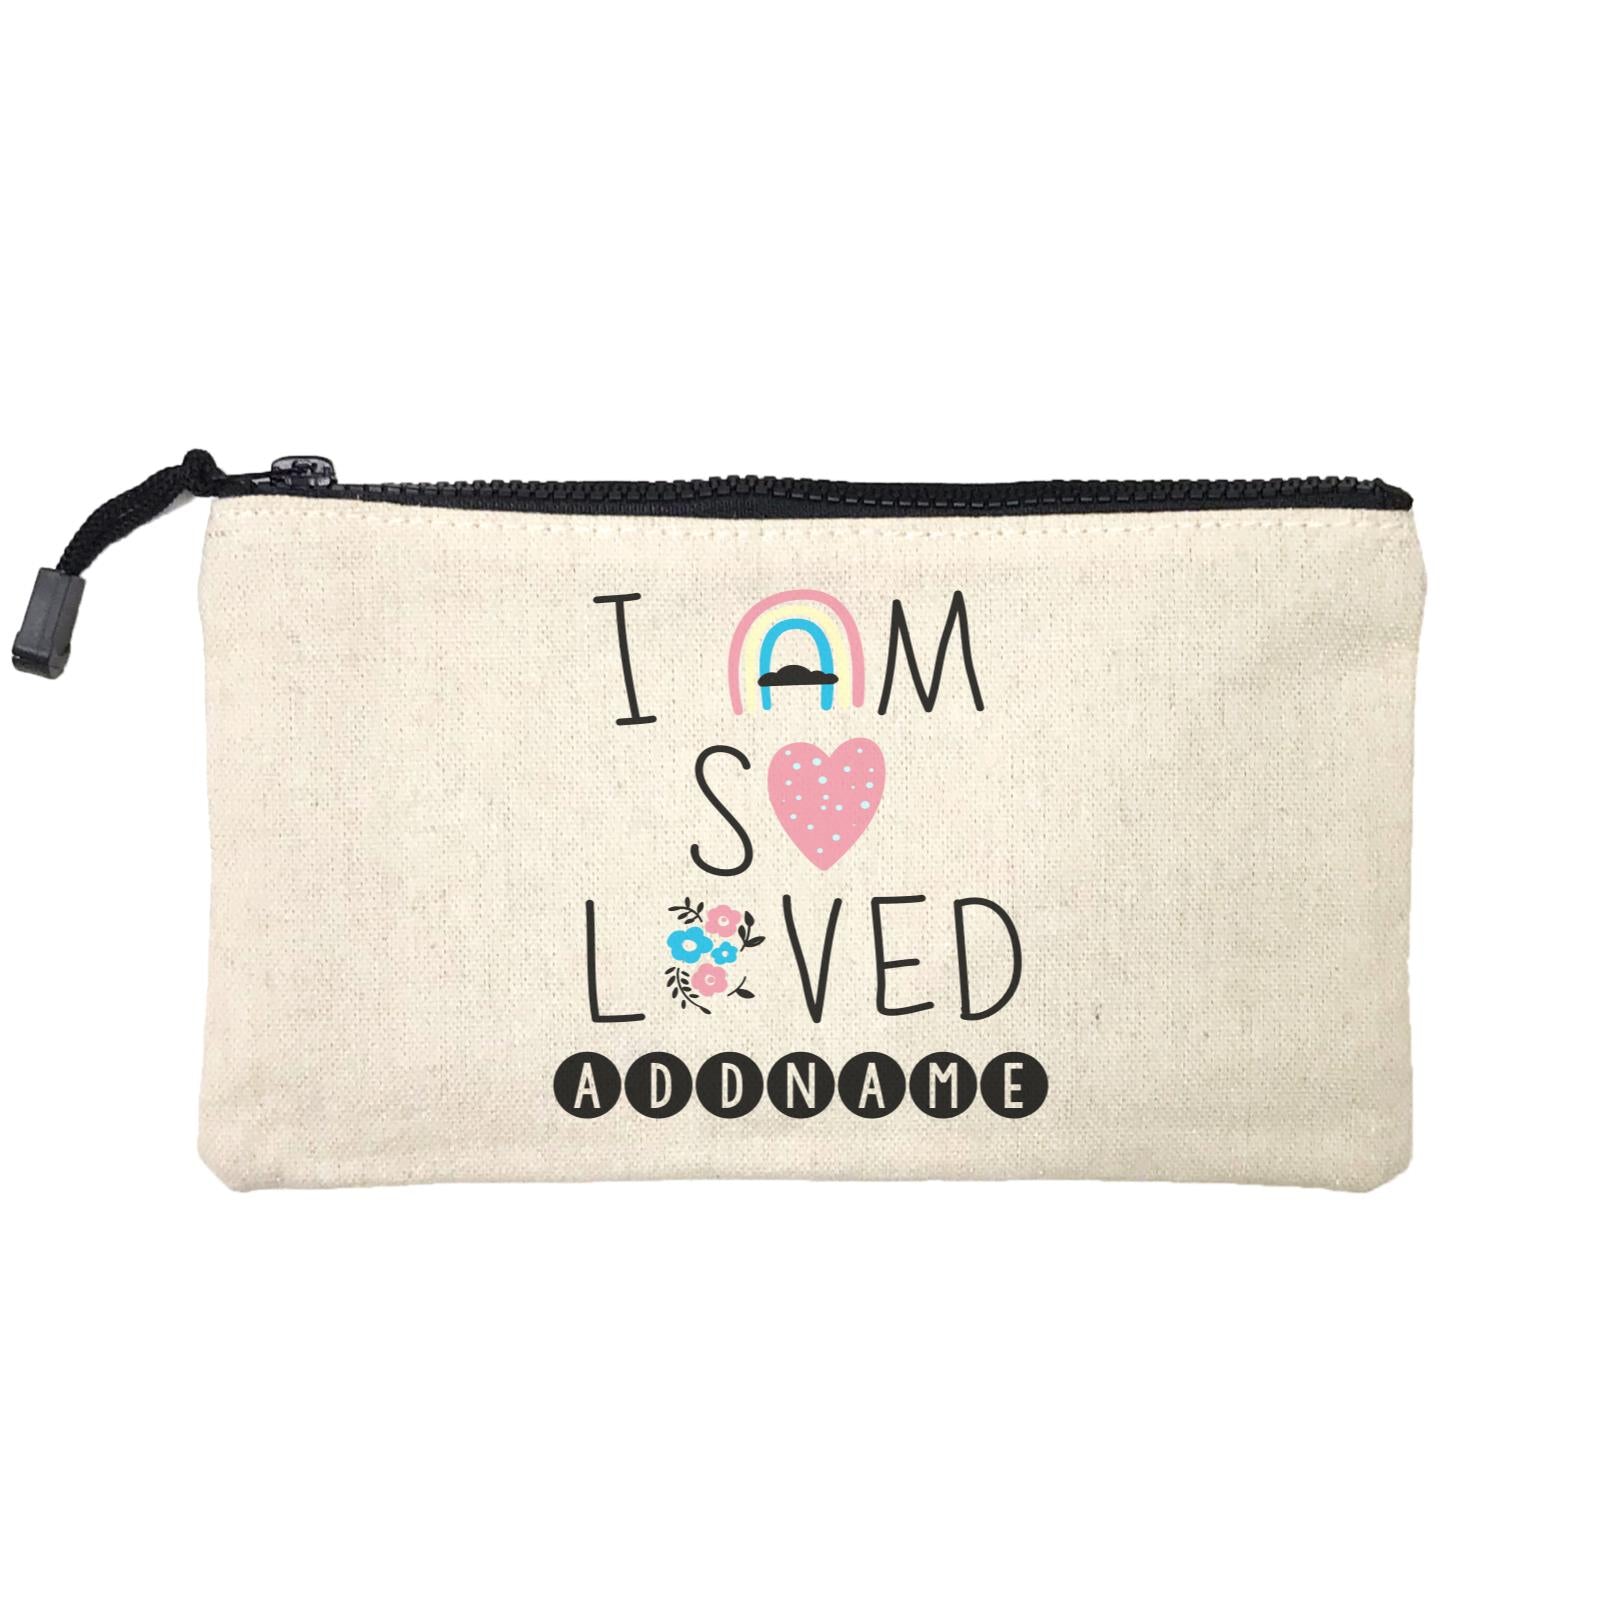 Children's Day Gift Series I Am So Loved Addname SP Stationery Pouch